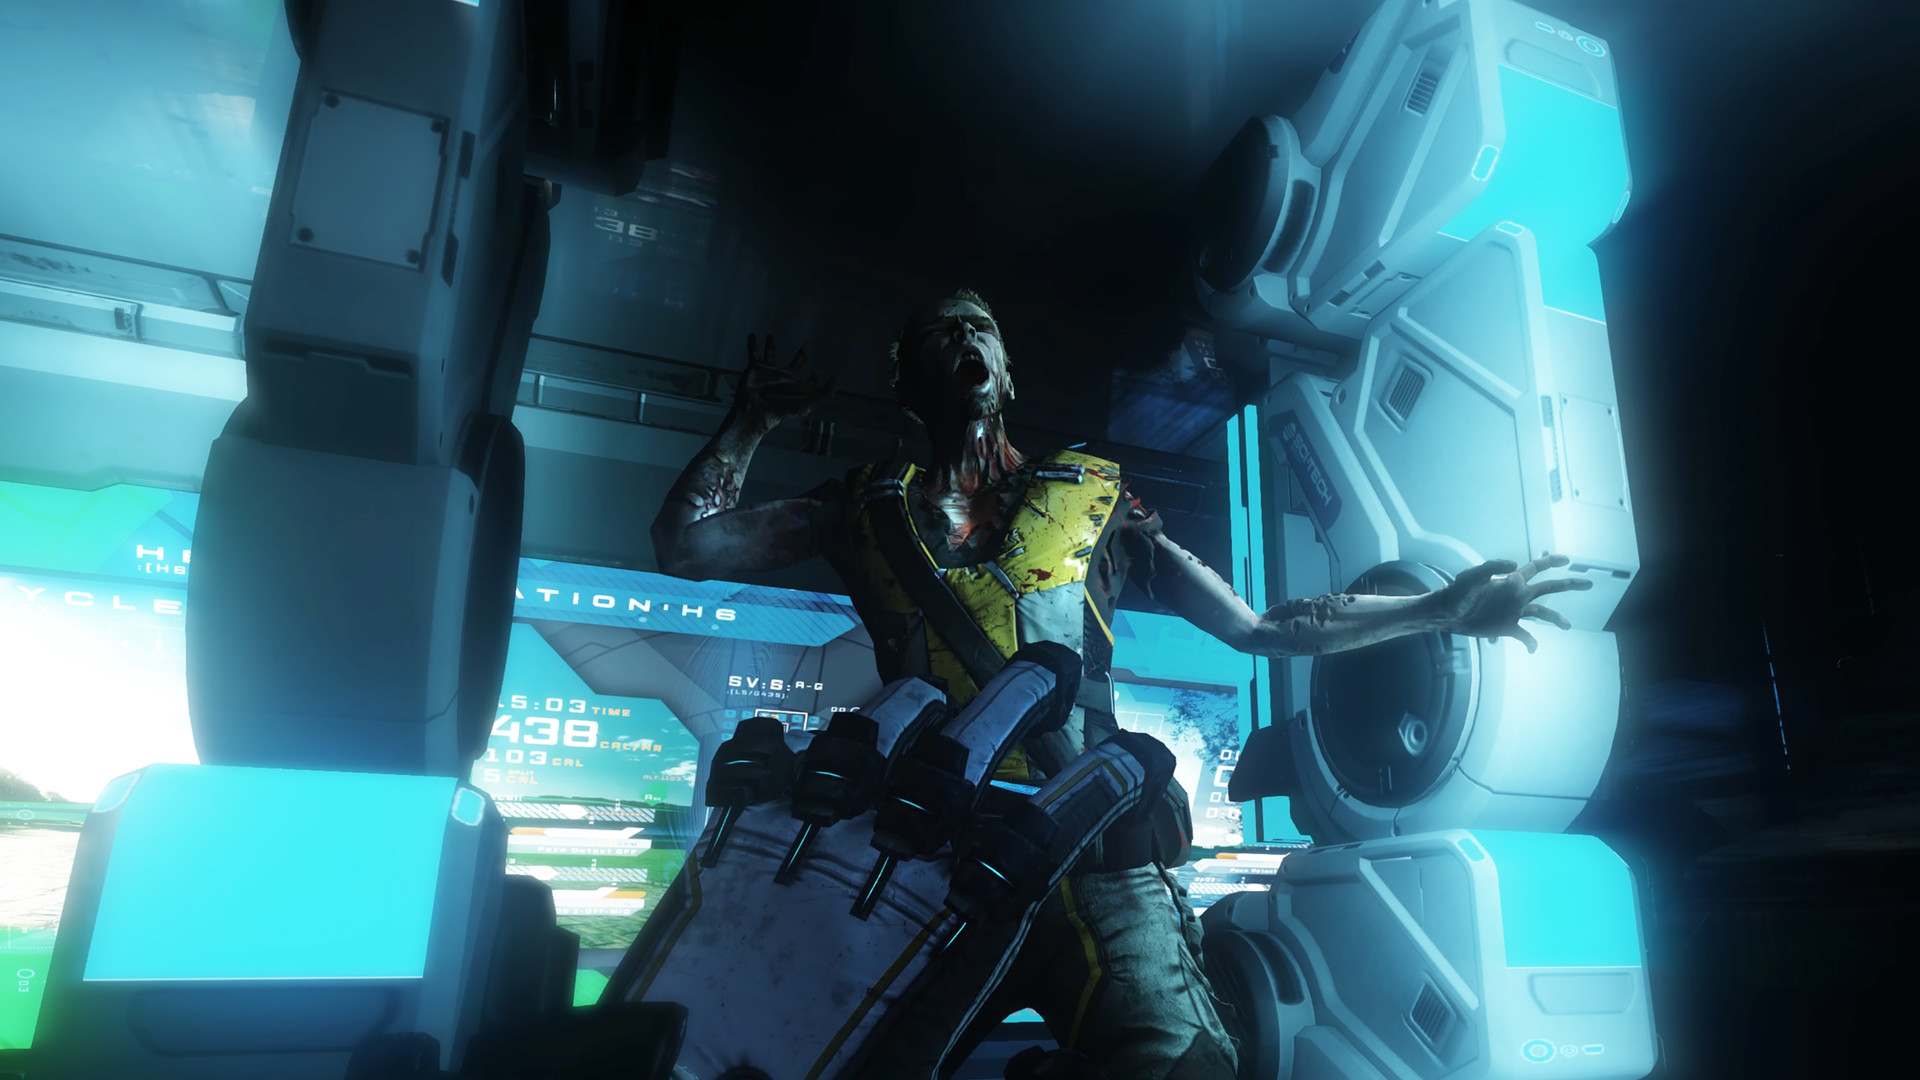 The Persistence Enhanced Available Now for Xbox Series X